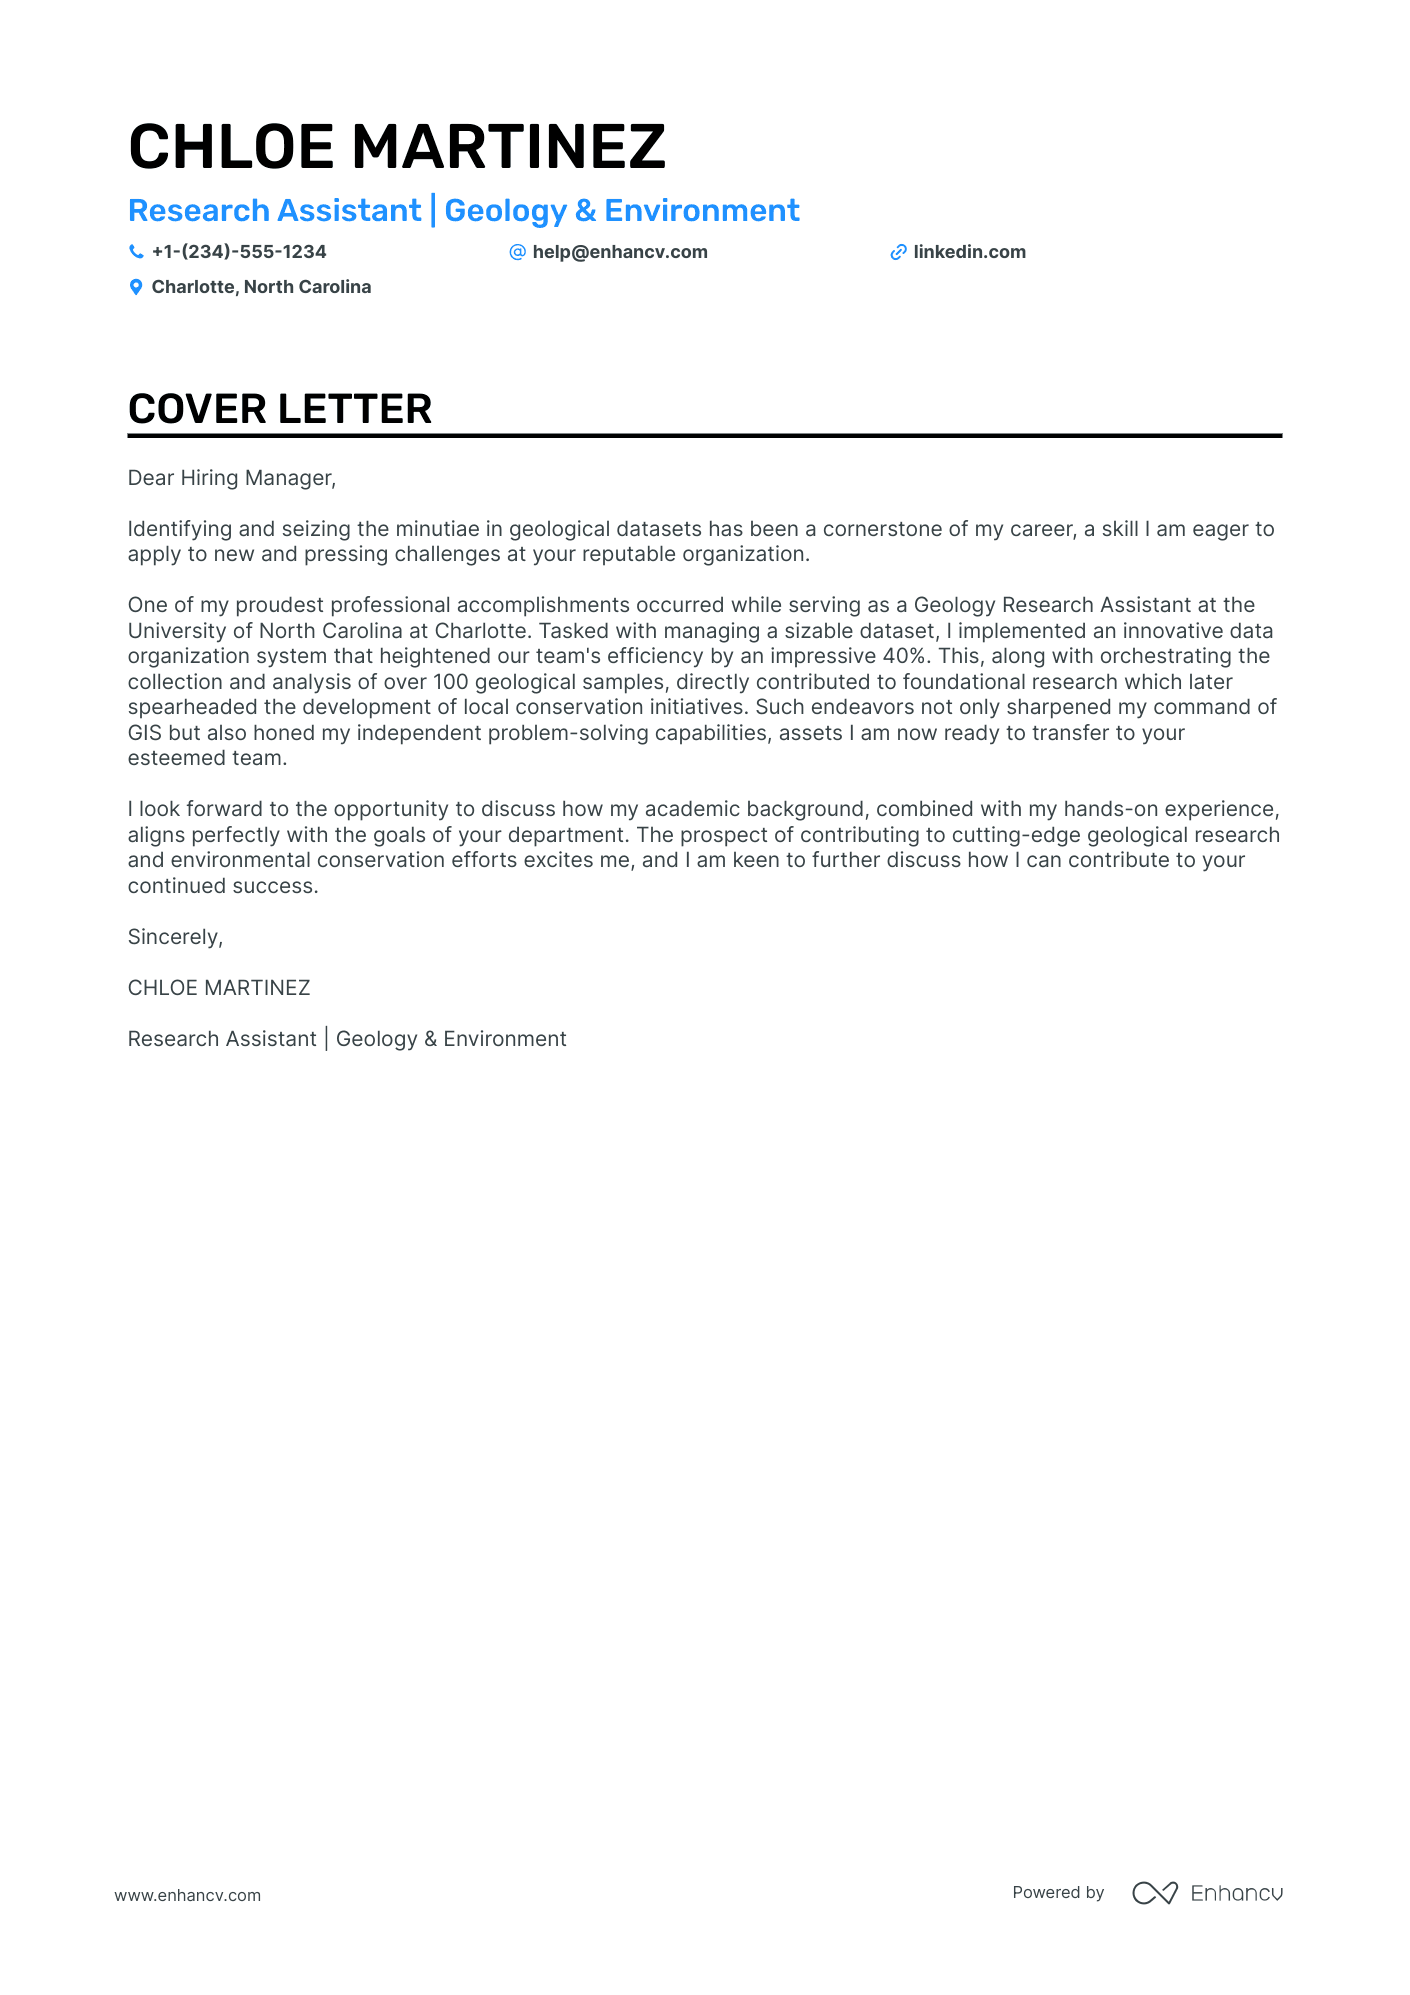 covering letter example for research